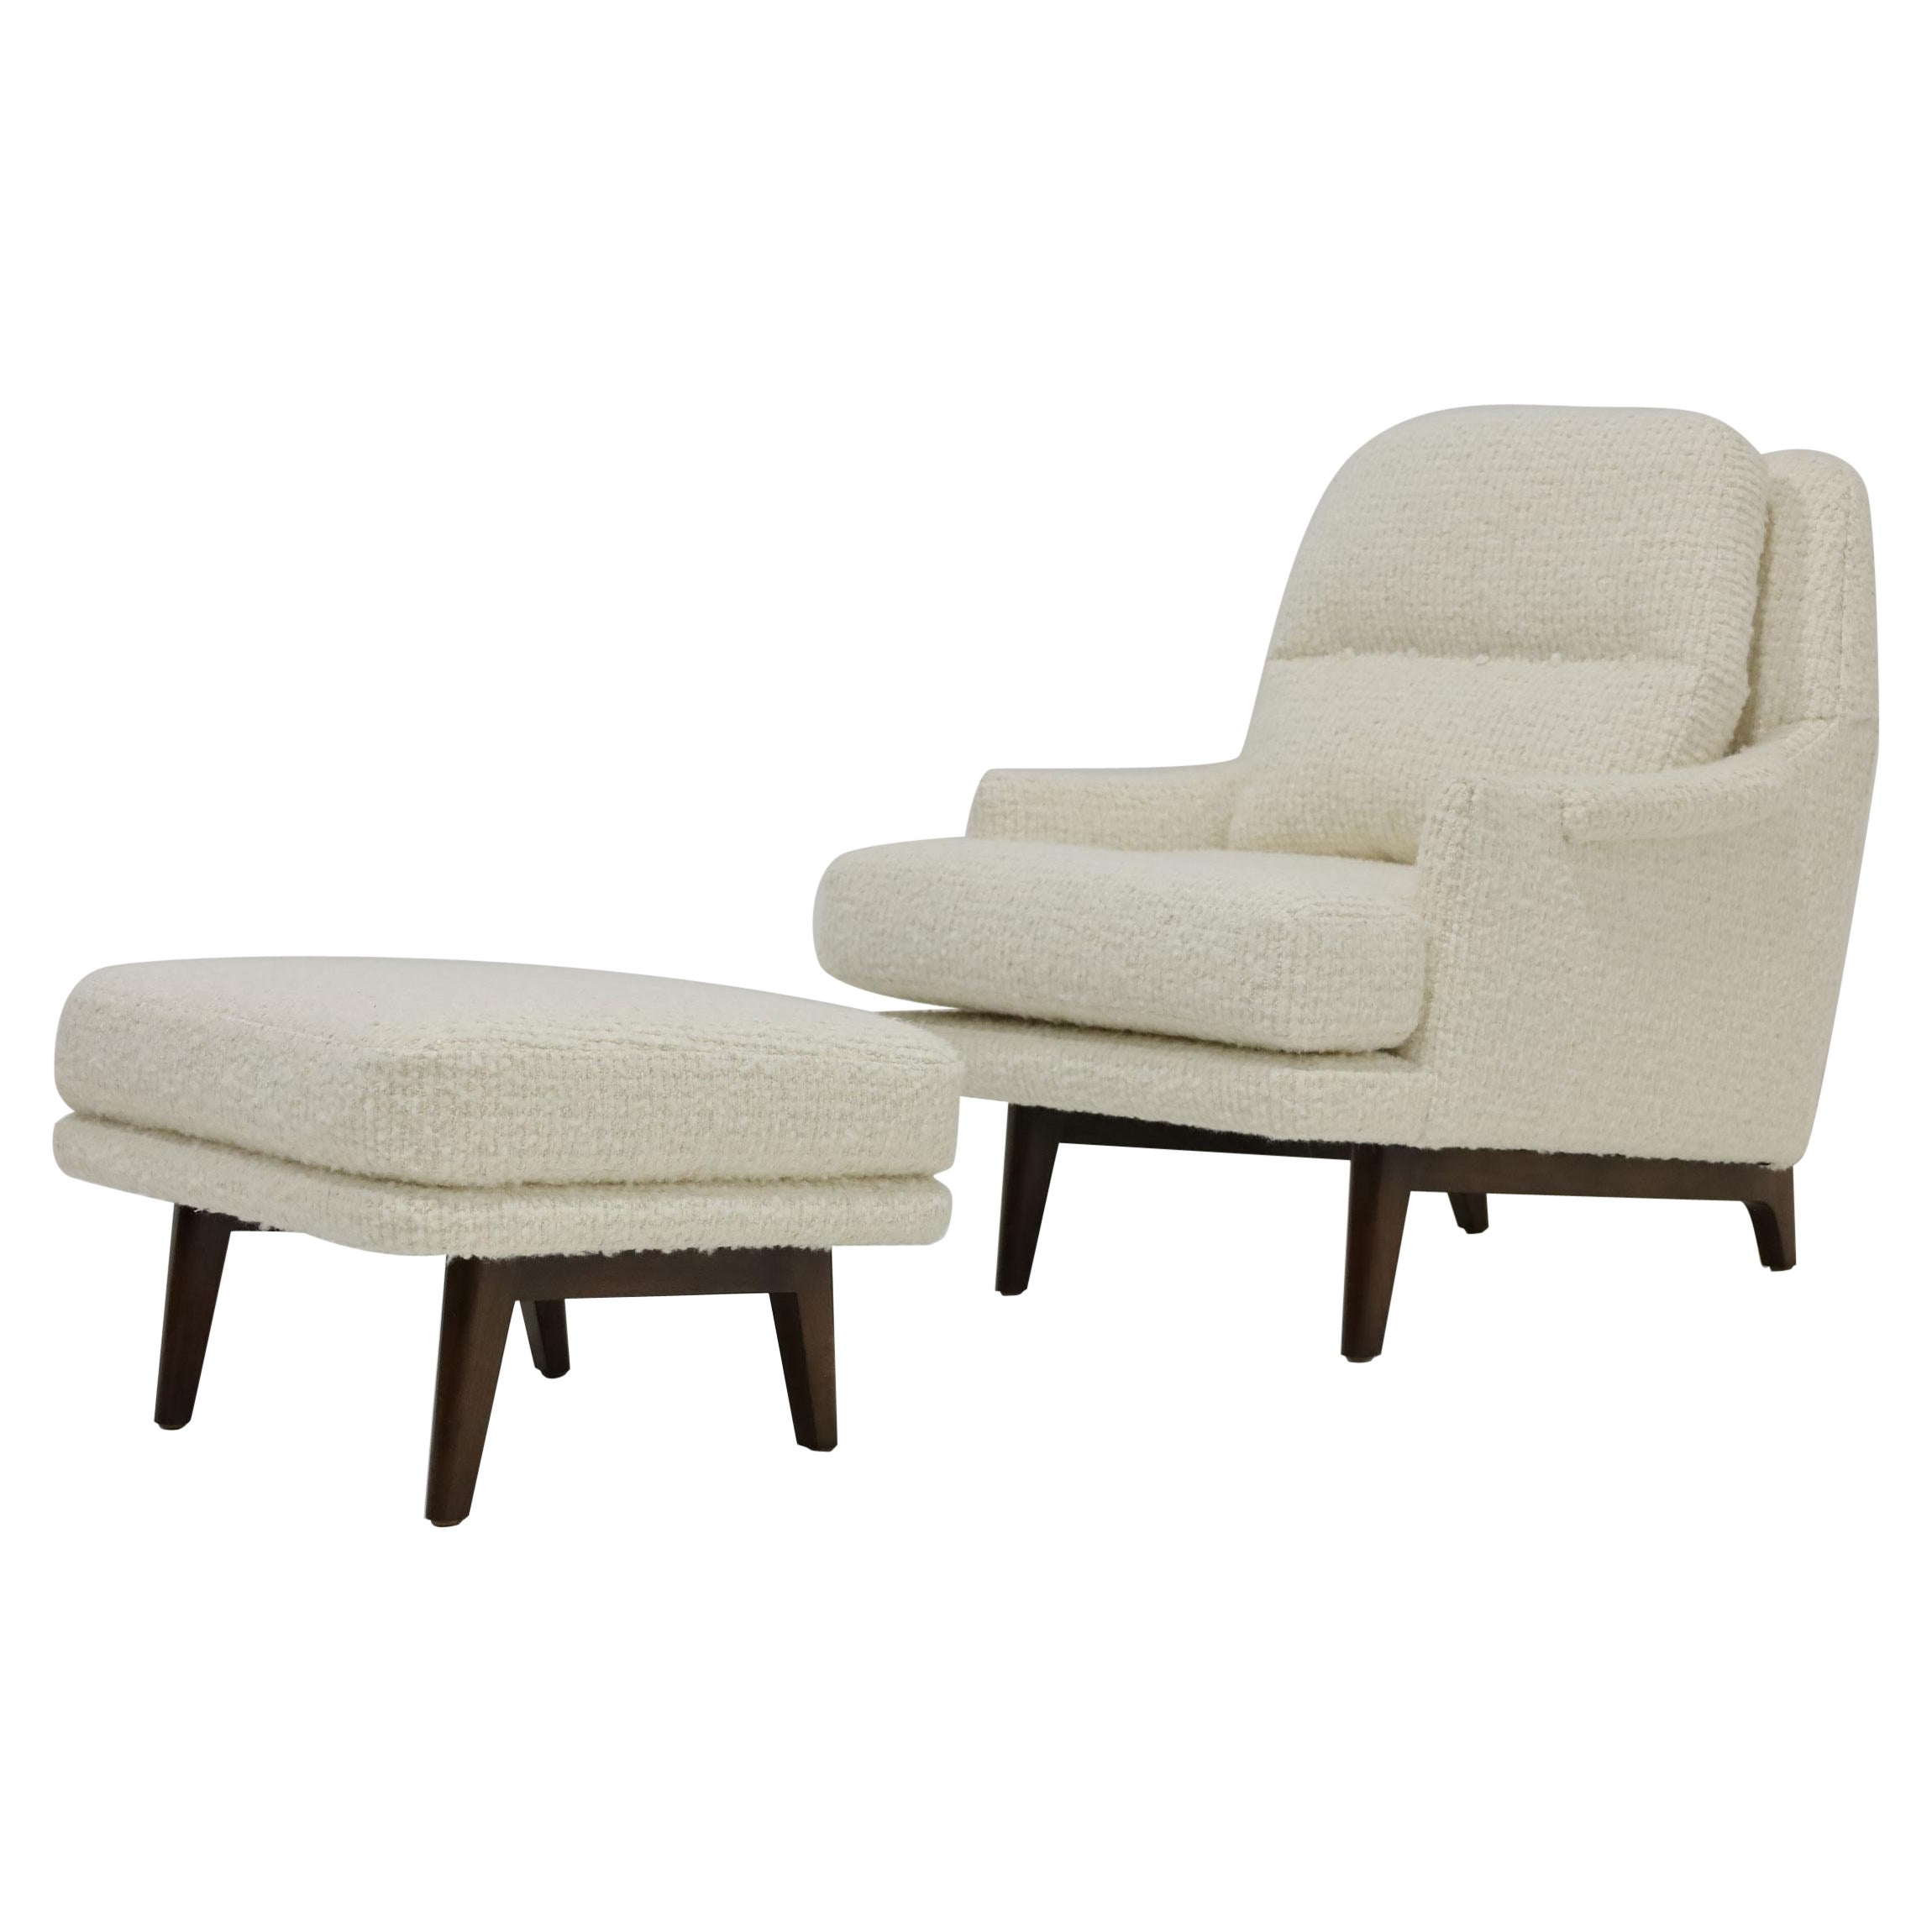 Roger Sprunger for Dunbar Lounge Chair and Ottoman in Holly Hunt Great Plains